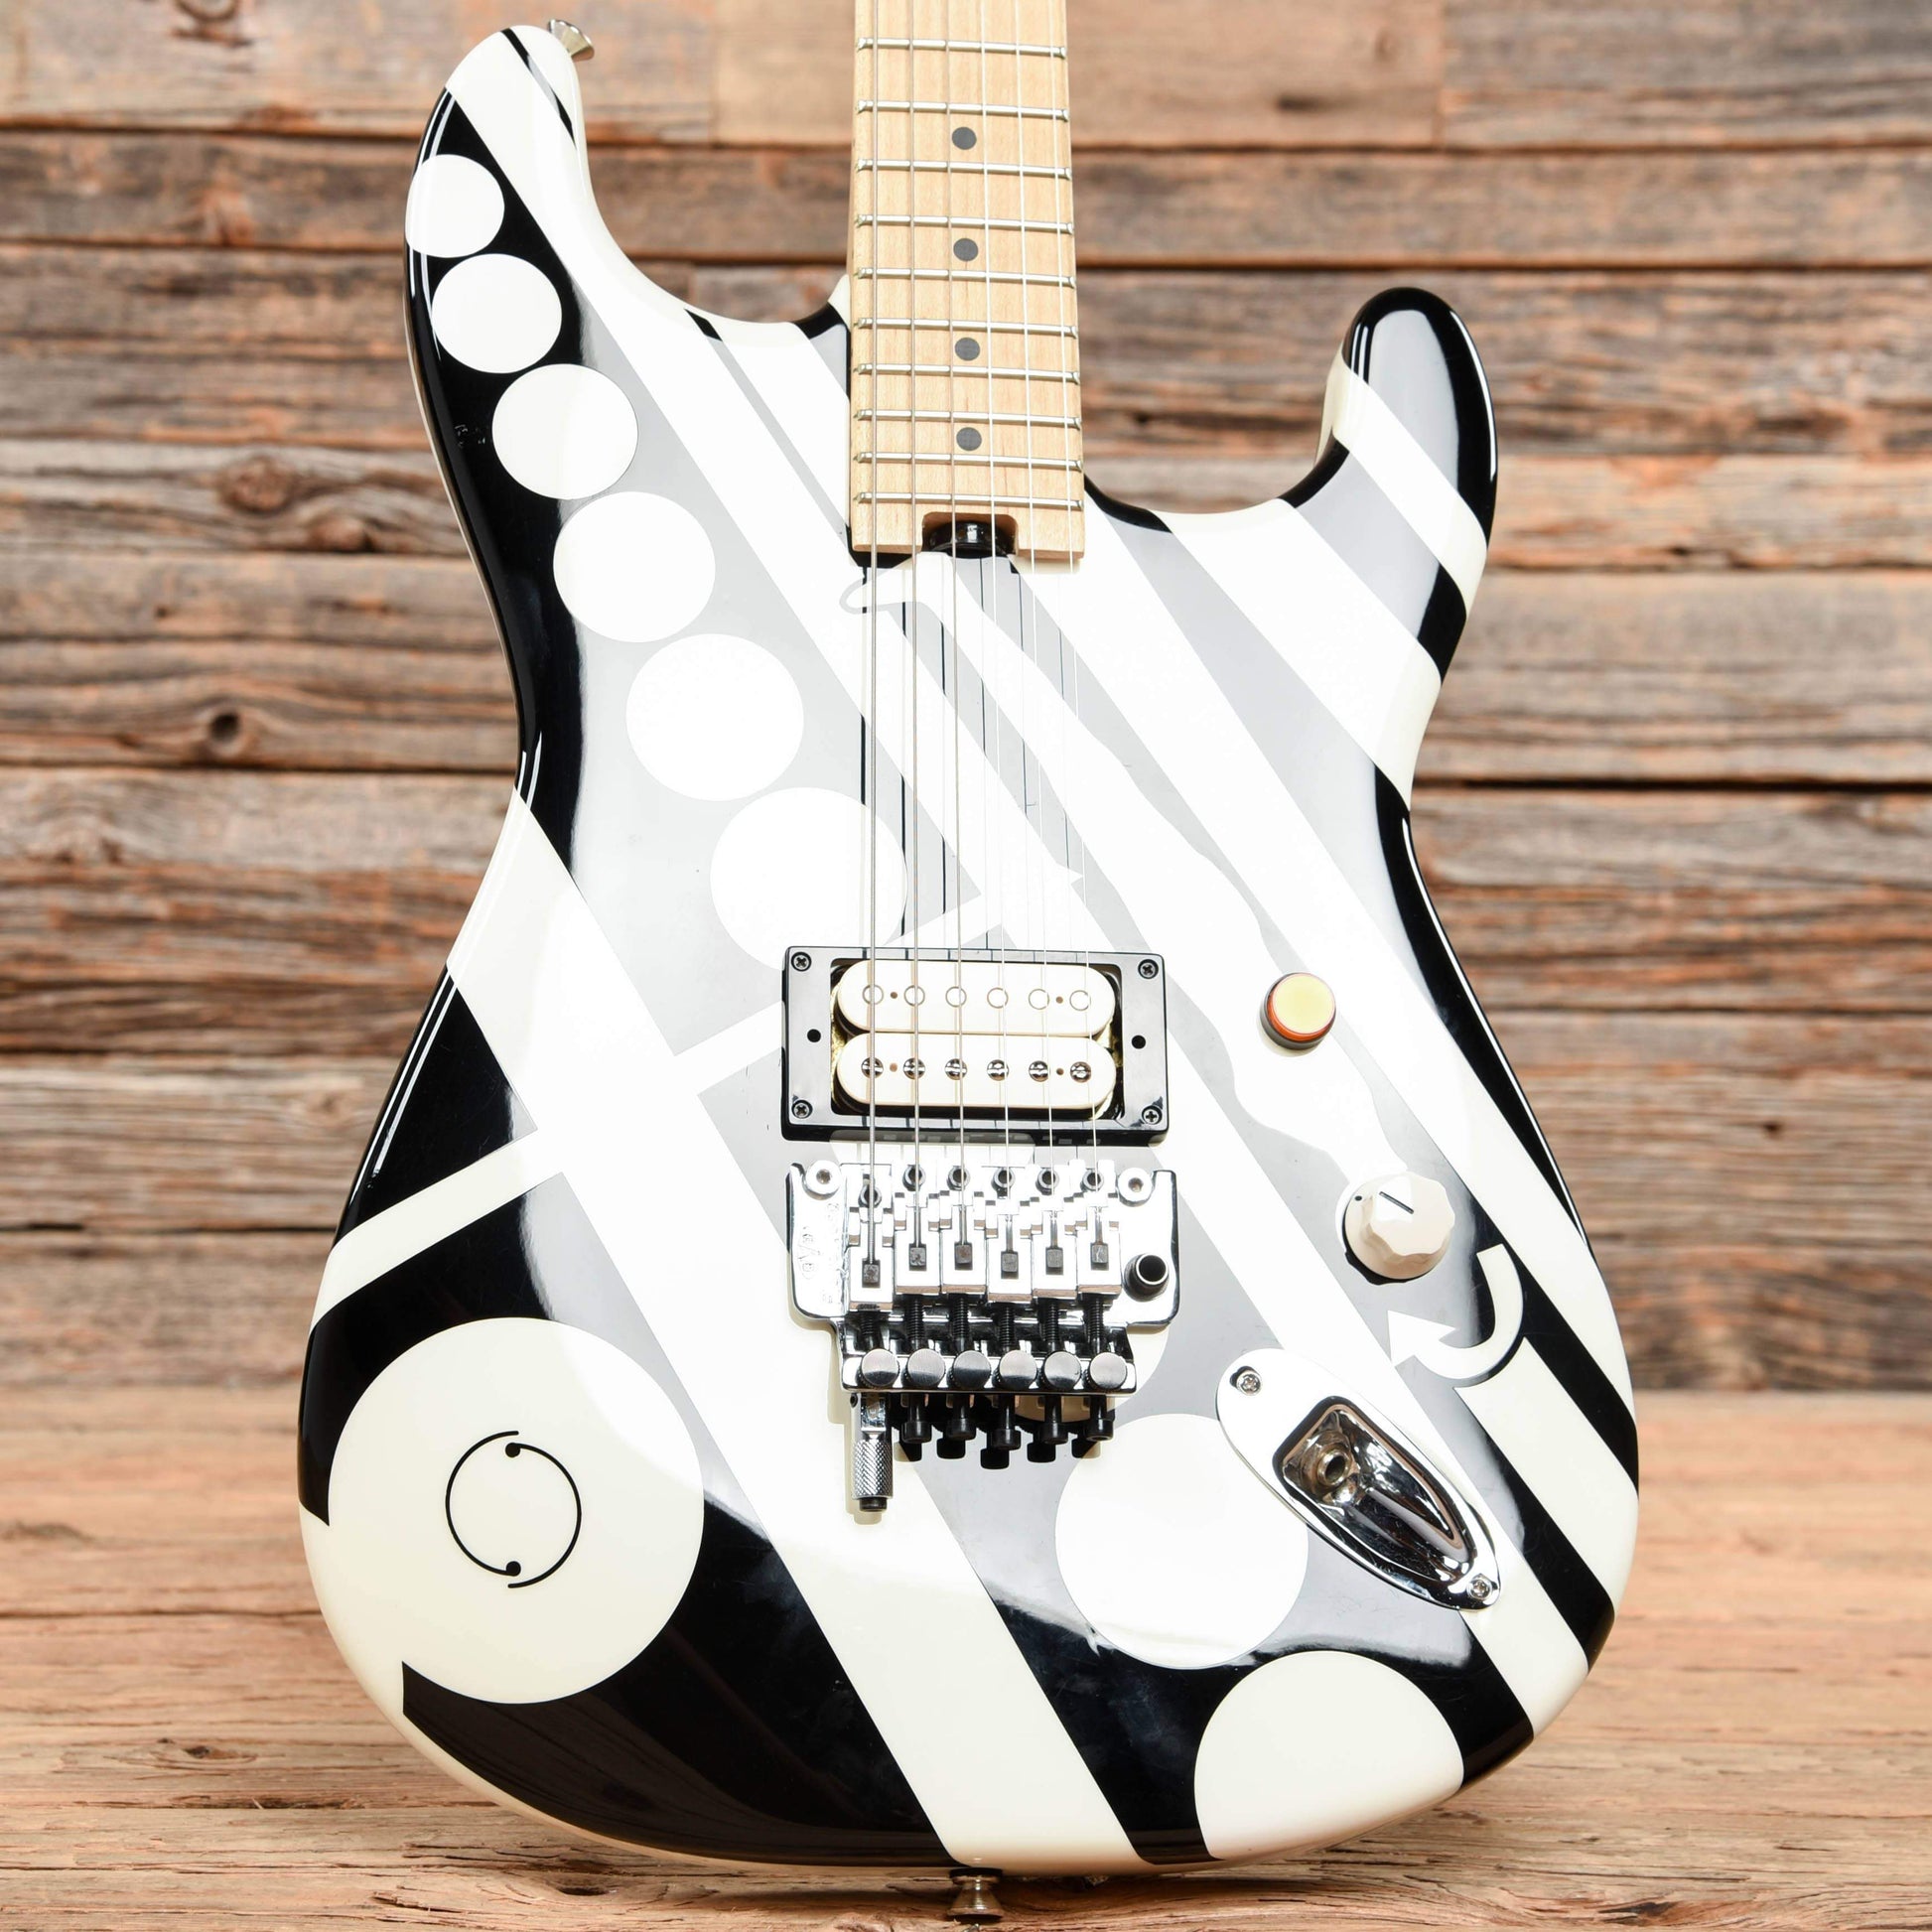 EVH Striped Series "Circles/See Ya" Black and White Crop Circles Graphic 2014 Electric Guitars / Solid Body